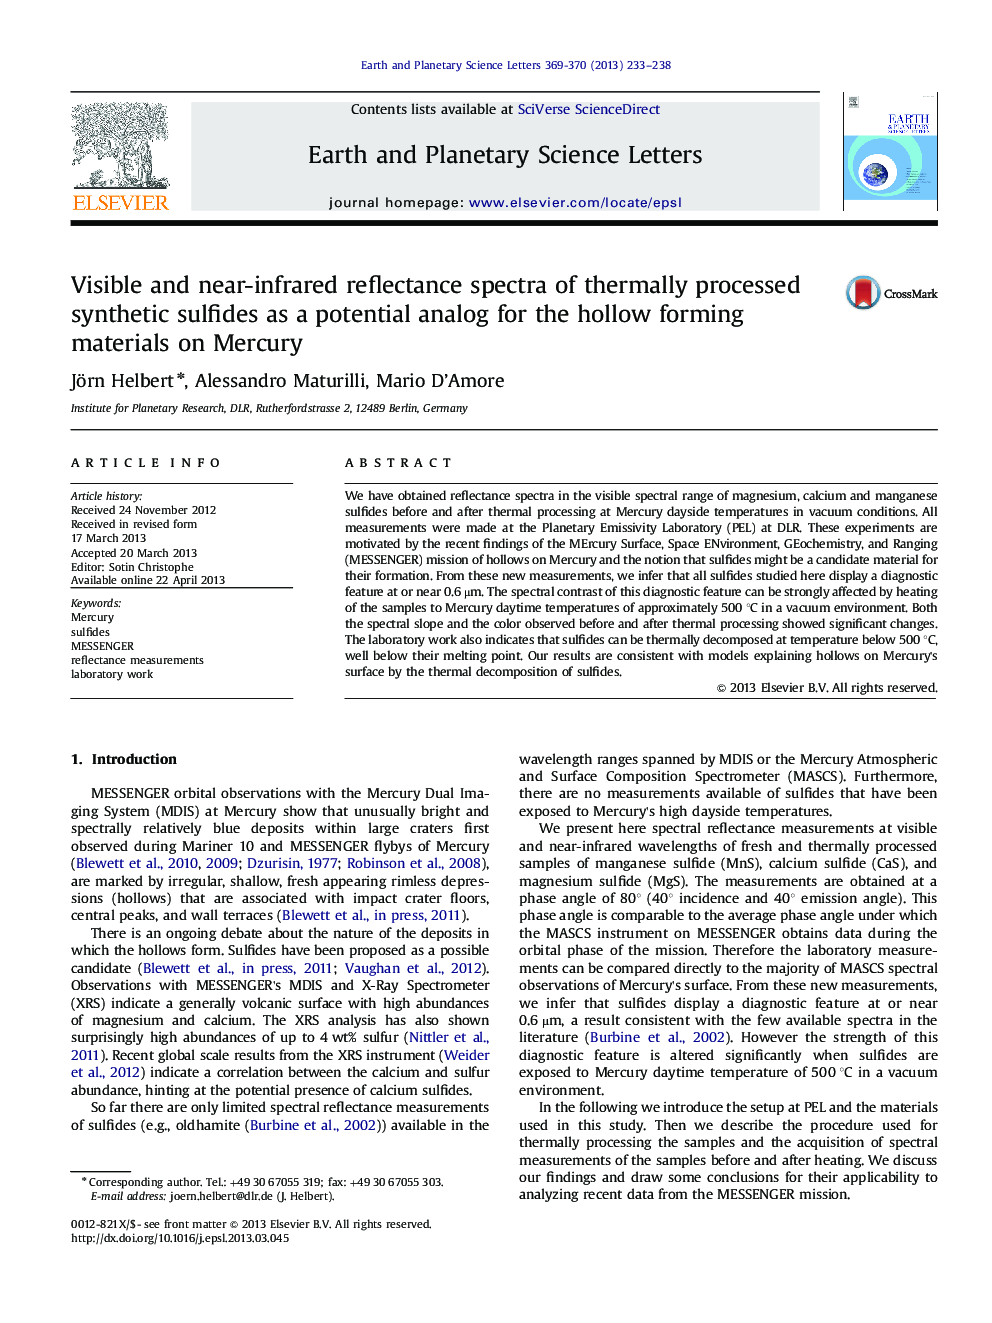 Visible and near-infrared reflectance spectra of thermally processed synthetic sulfides as a potential analog for the hollow forming materials on Mercury